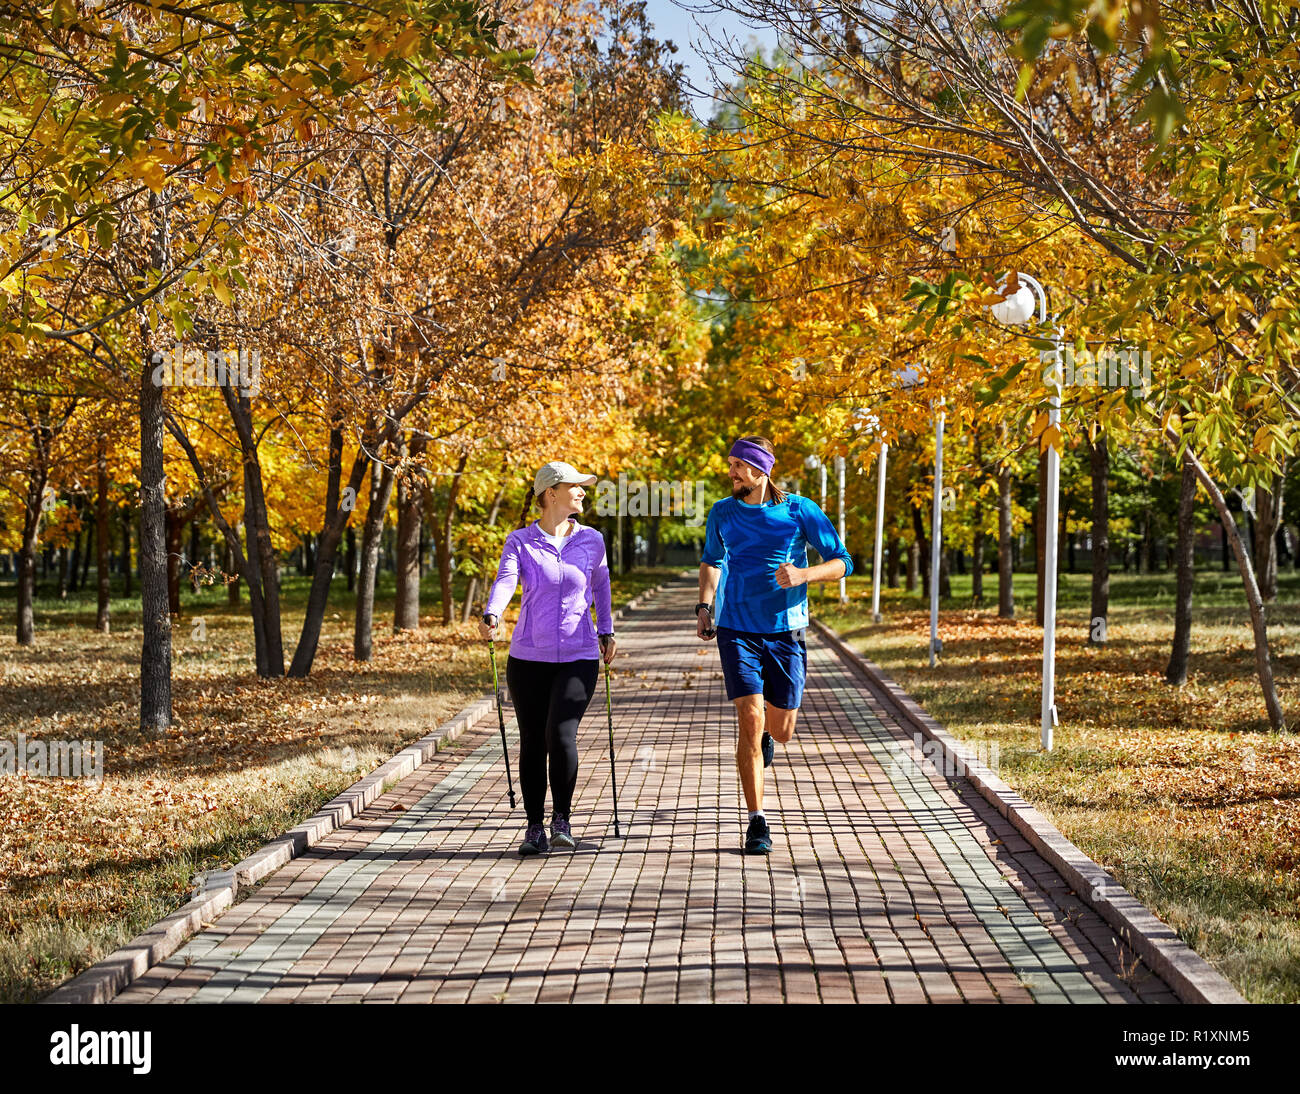 Young couple training in autumn park. Man is jogging and woman doing Nordic walking with poles. Healthy life concept. Stock Photo